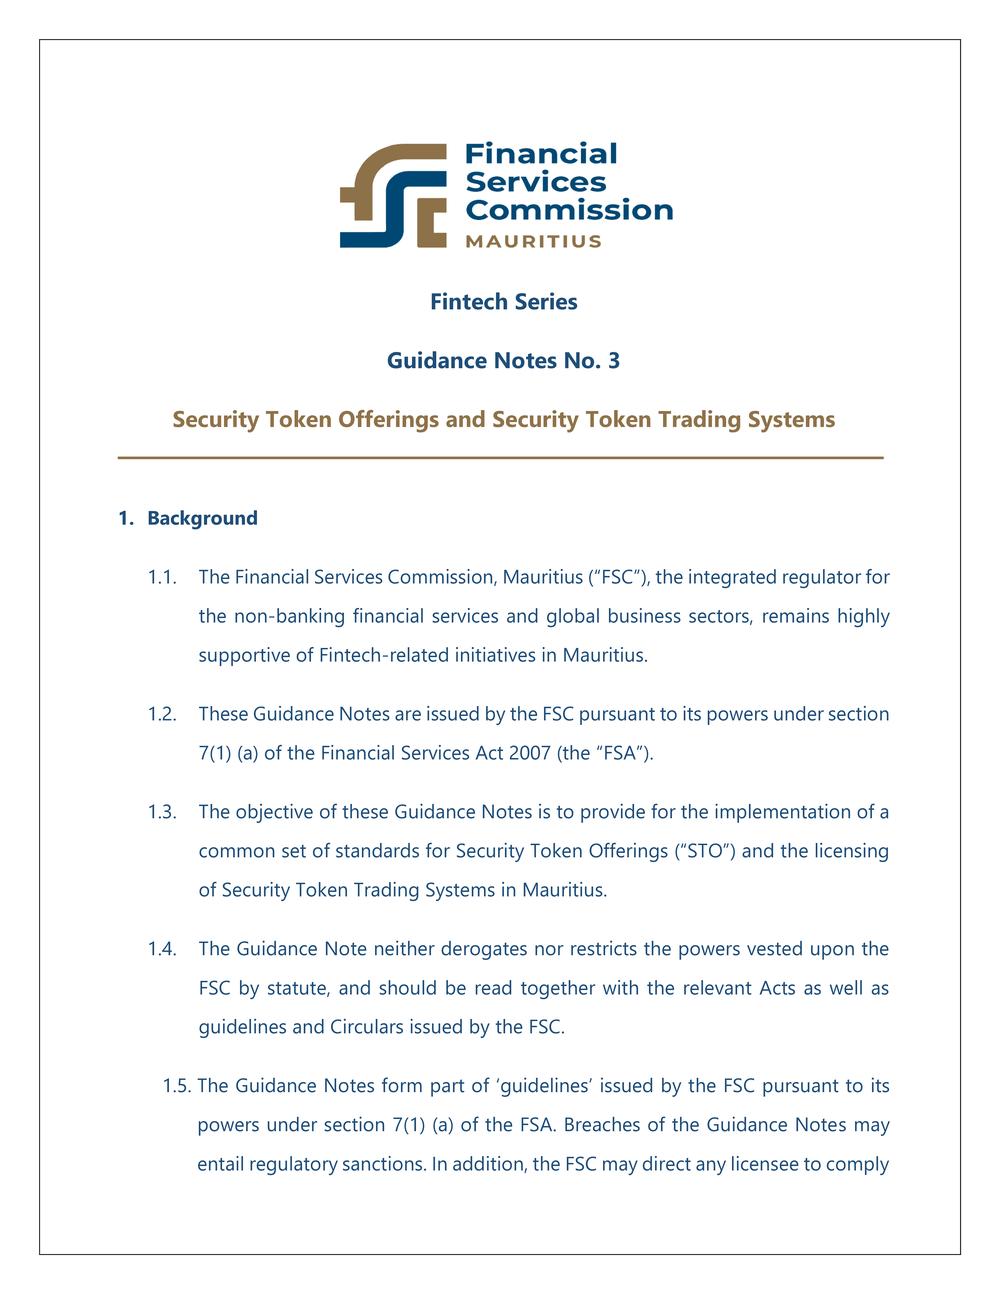 FSC Guidance Notes - Security Token Offerings and Security Token Trading Systems